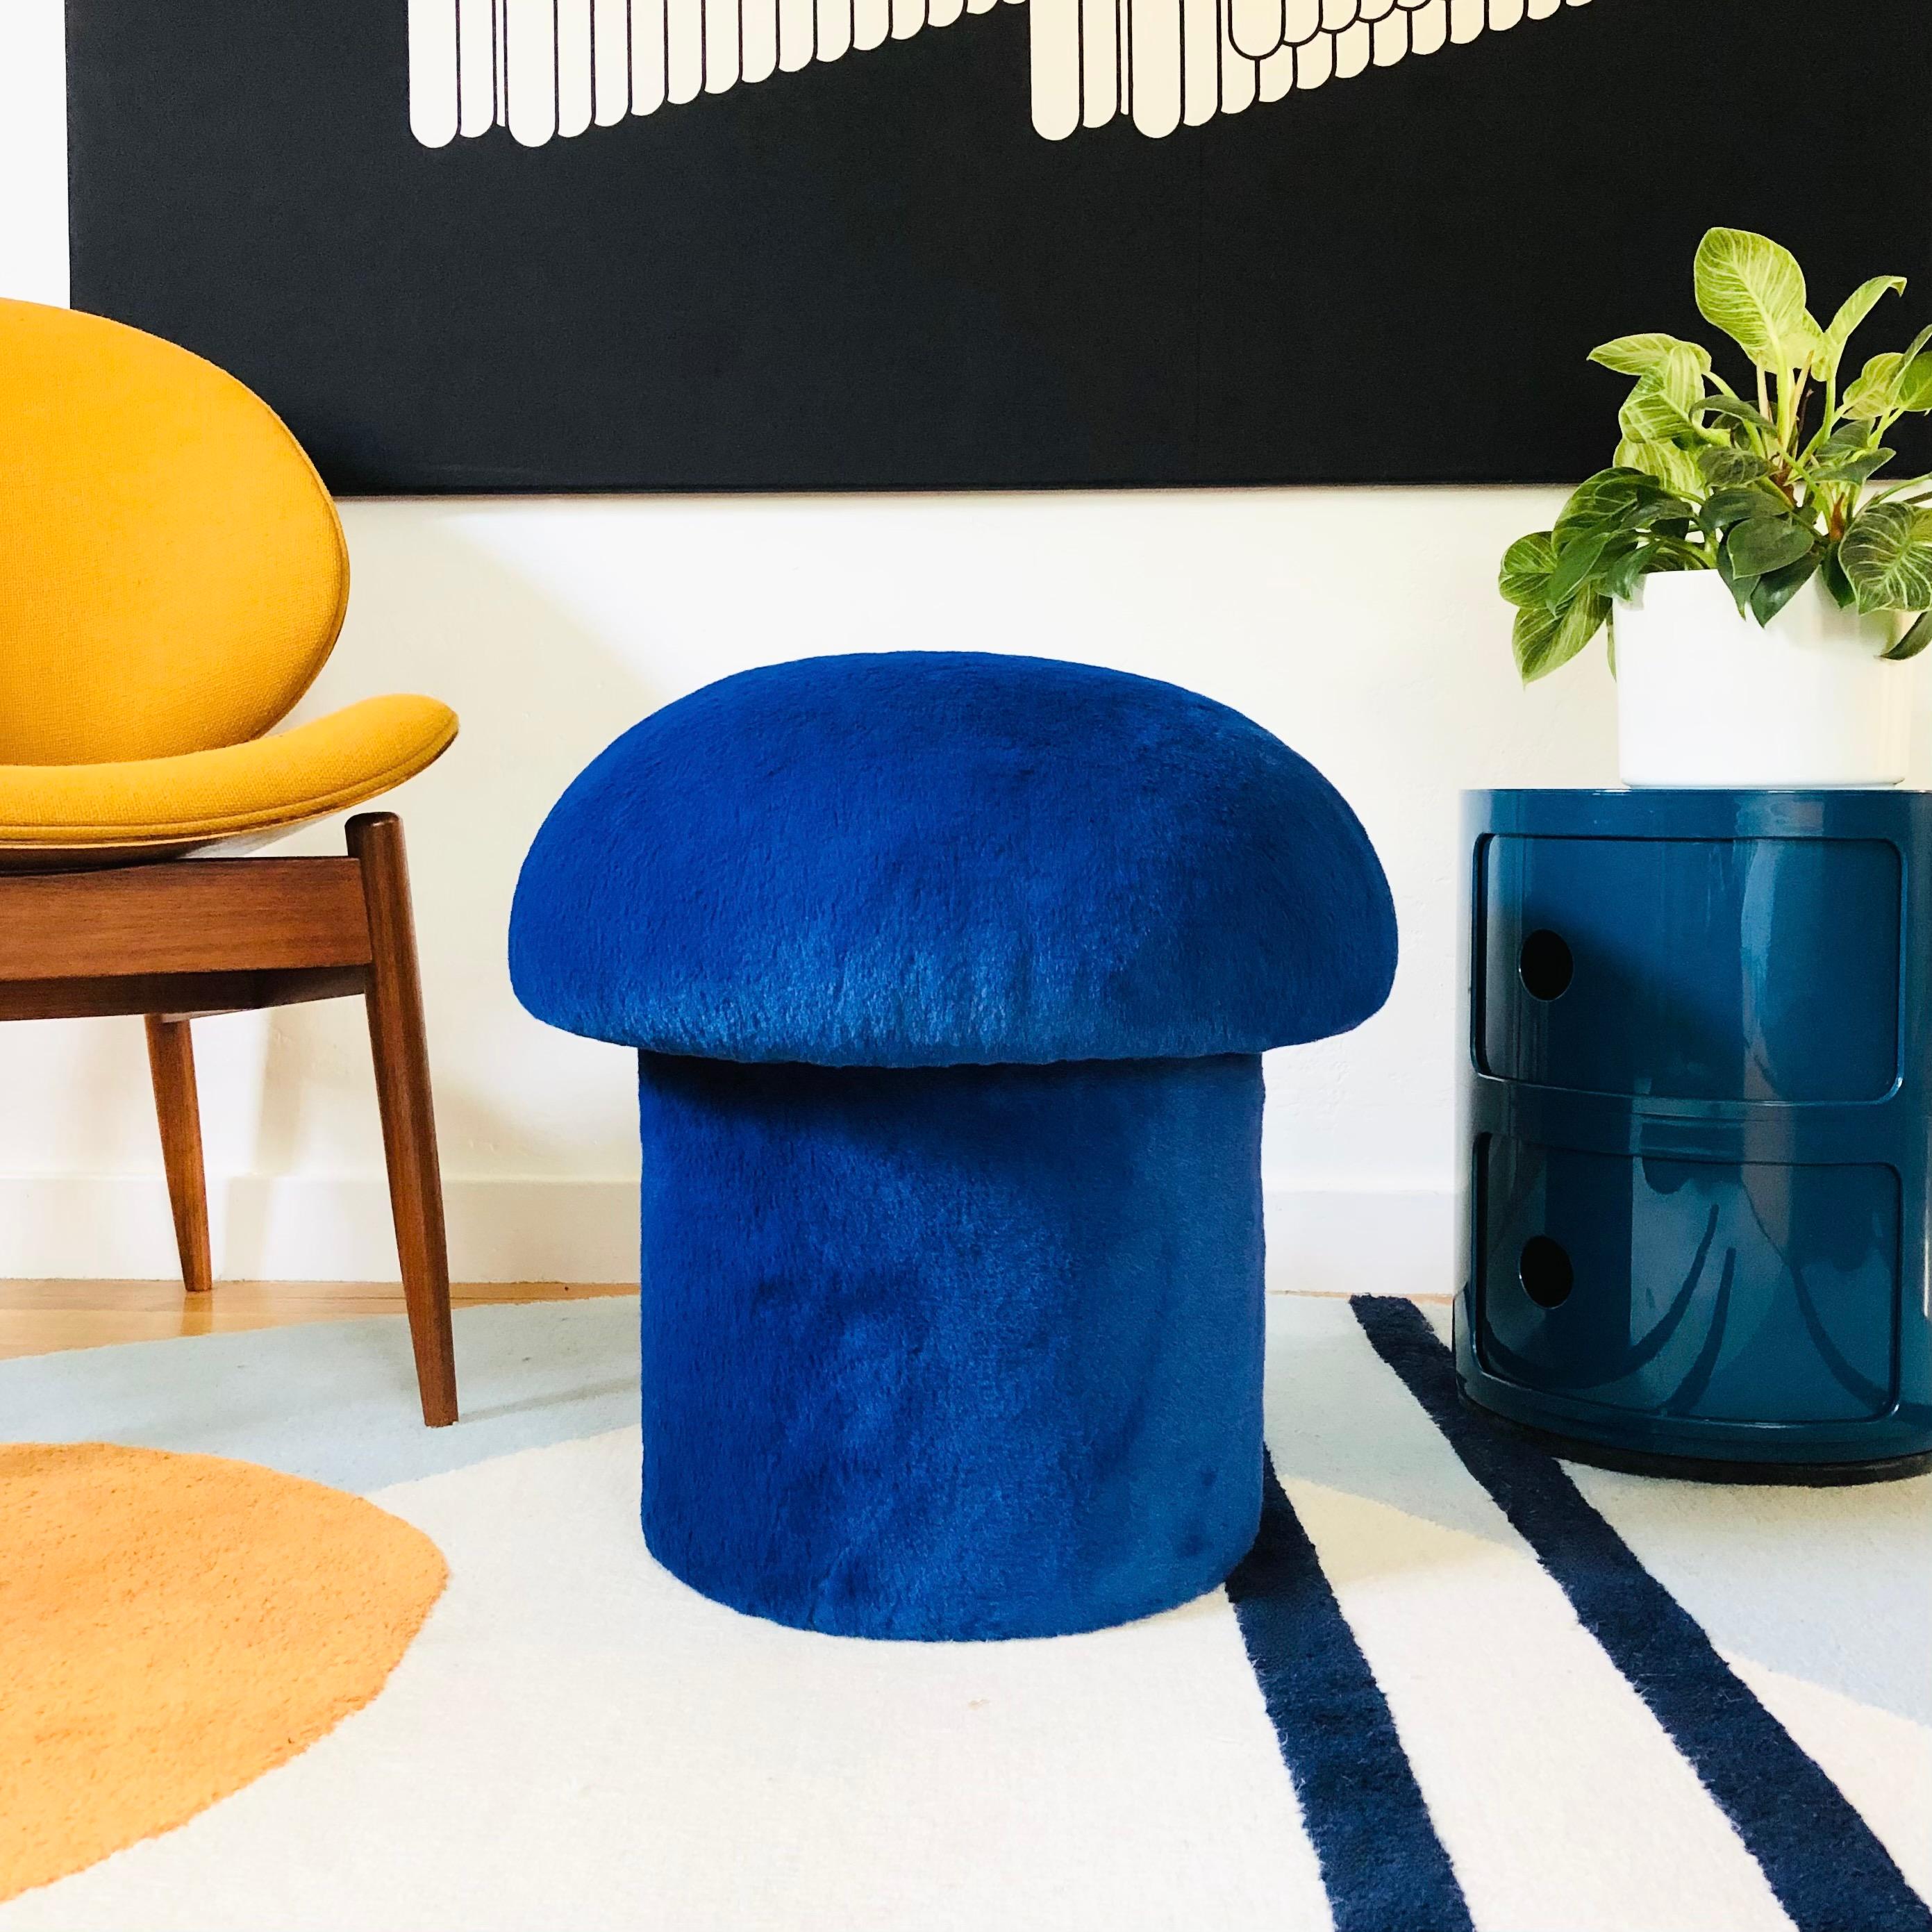 A handmade mushroom shaped ottoman, upholstered in a sapphire colored high pile plush fabric. Perfect for using as a footstool or extra occasional seating. A comfortable cushioned seat and sculptural accent piece.
PLEASE NOTE:
Color variations may